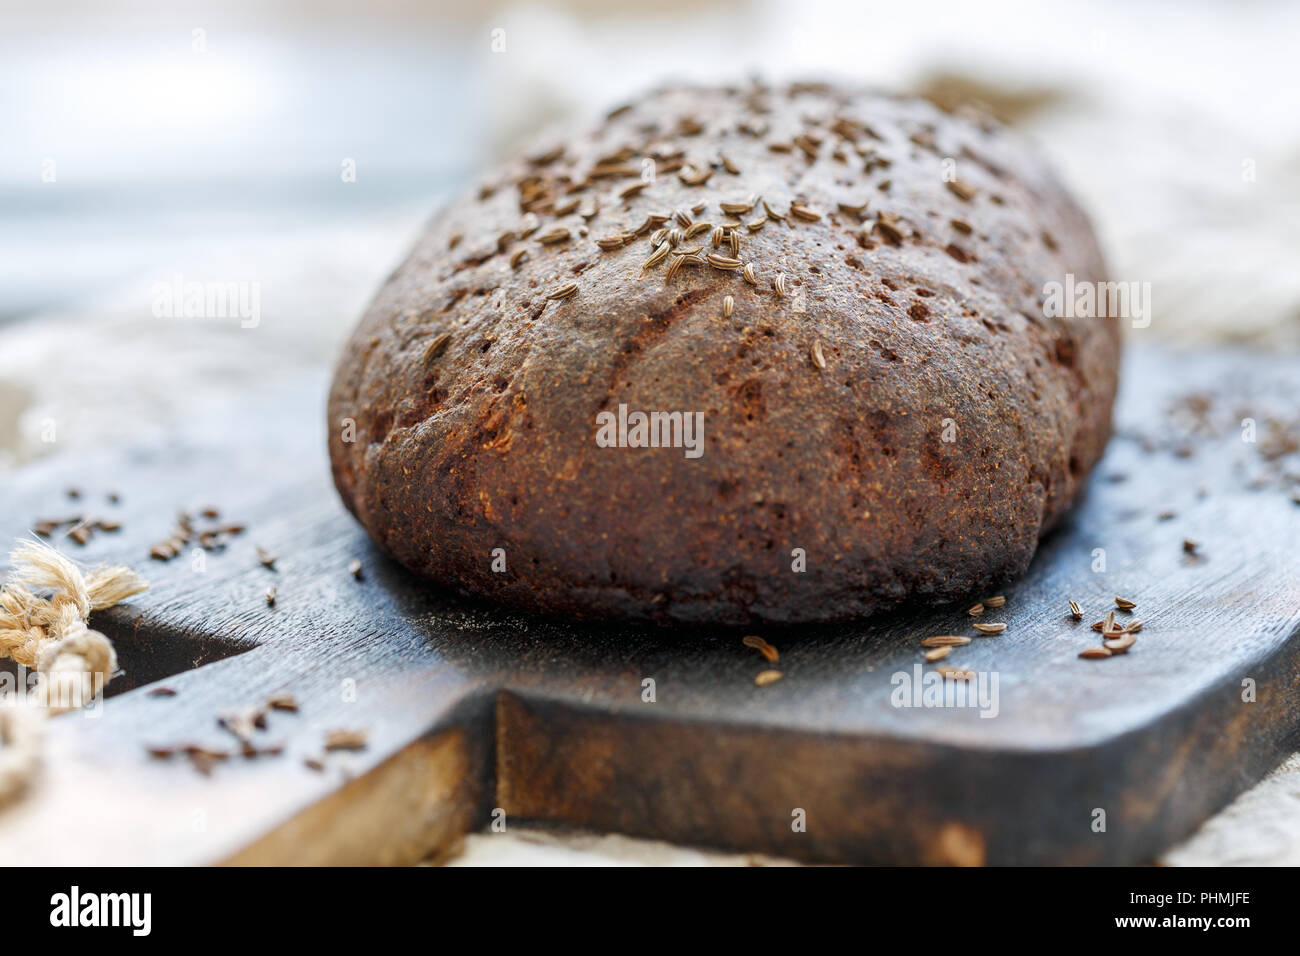 Loaf of artisan rye bread with cumin. Stock Photo